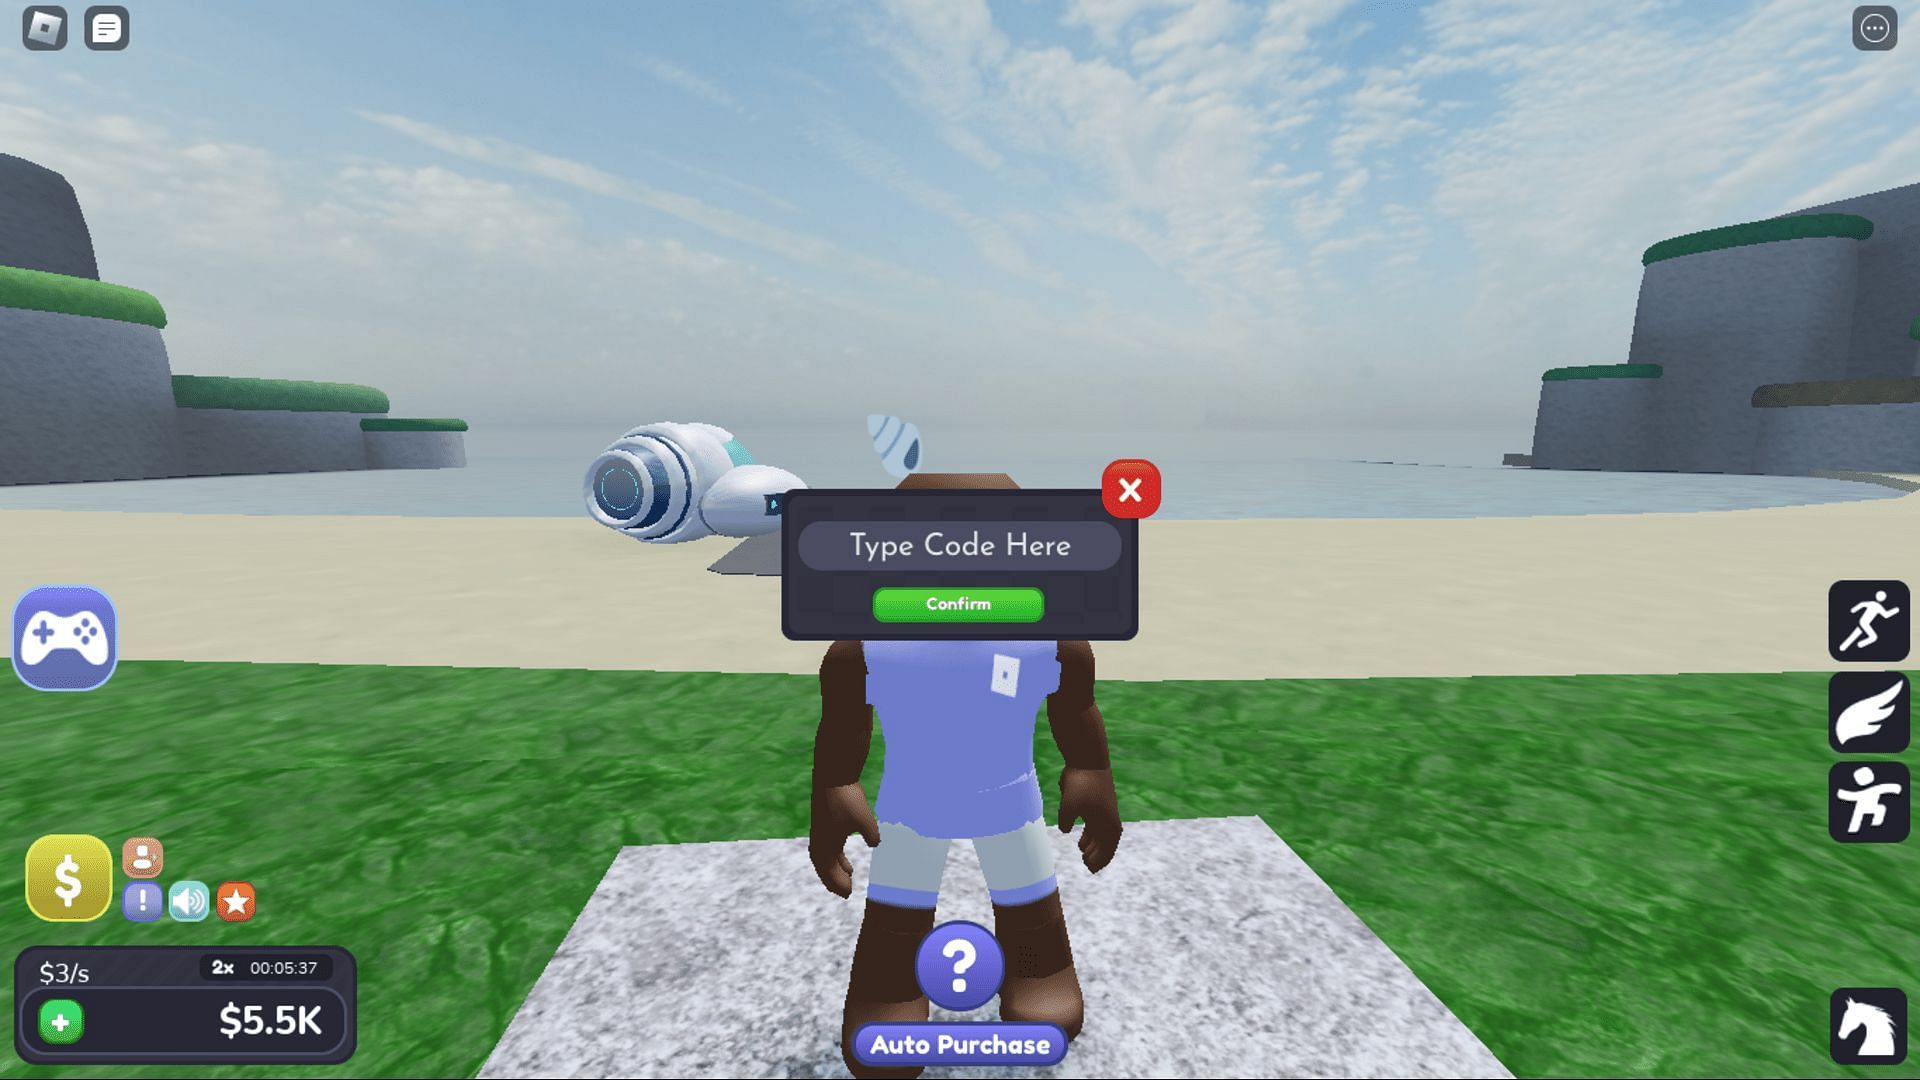 Redeem codes in Princess Castle Tycoon with ease (Image via Roblox)